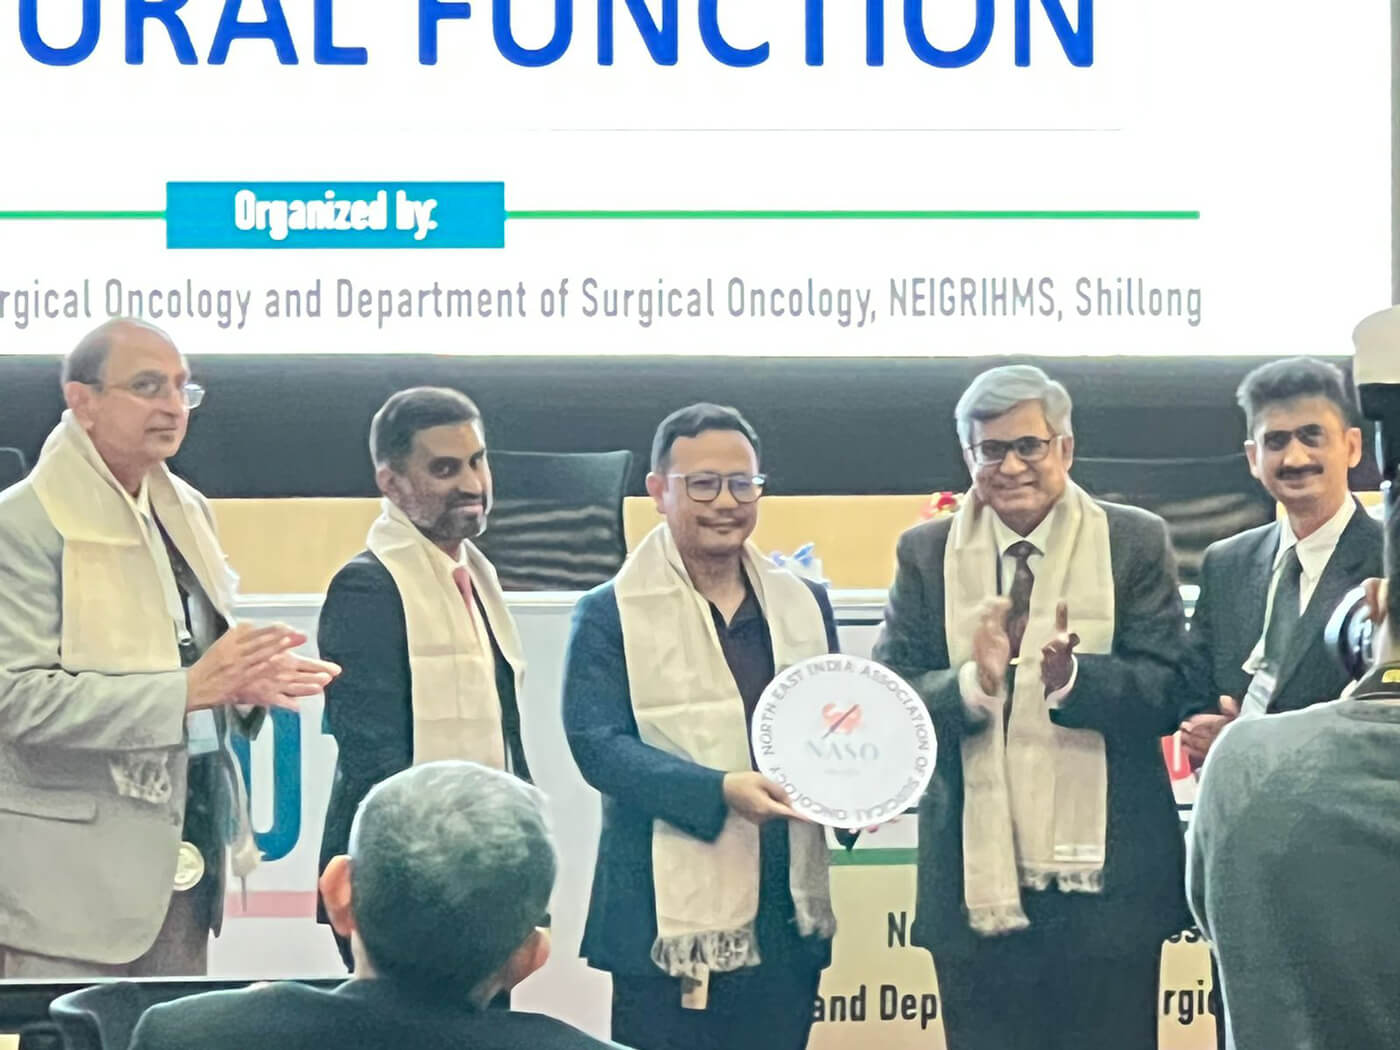 MID-TERM-ANNUAL-CONFERENCE-OF-INDIAN-ASSOCIATION-OF-SURGICAL-ONCOLOGY-2022-1